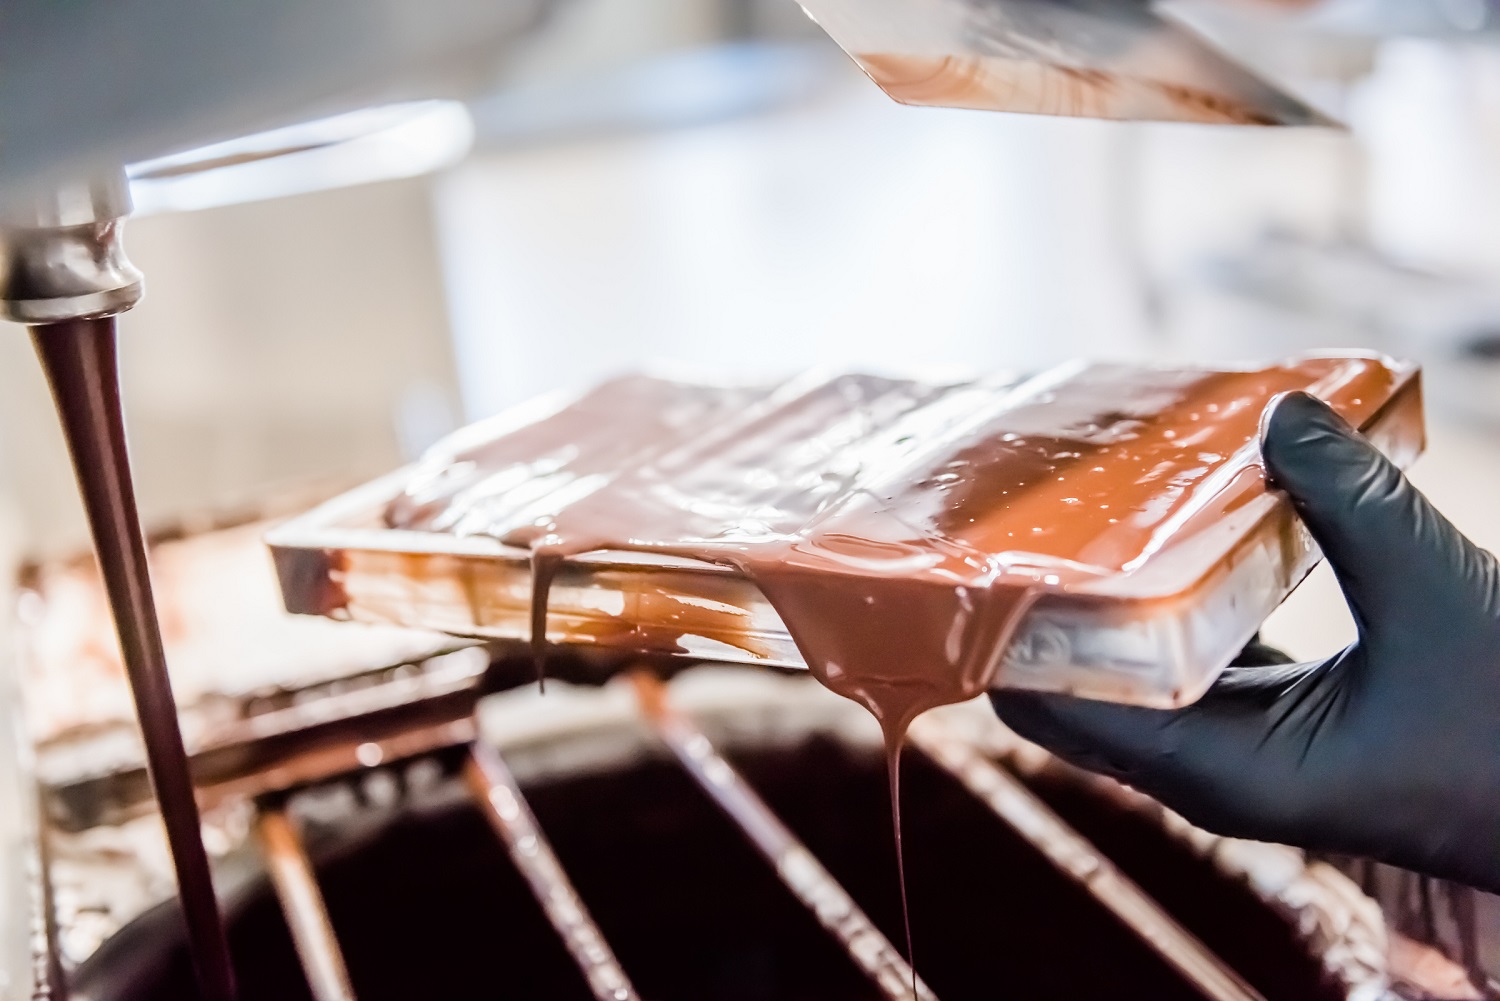 "Passion Chocolat | Pralines made by hand"